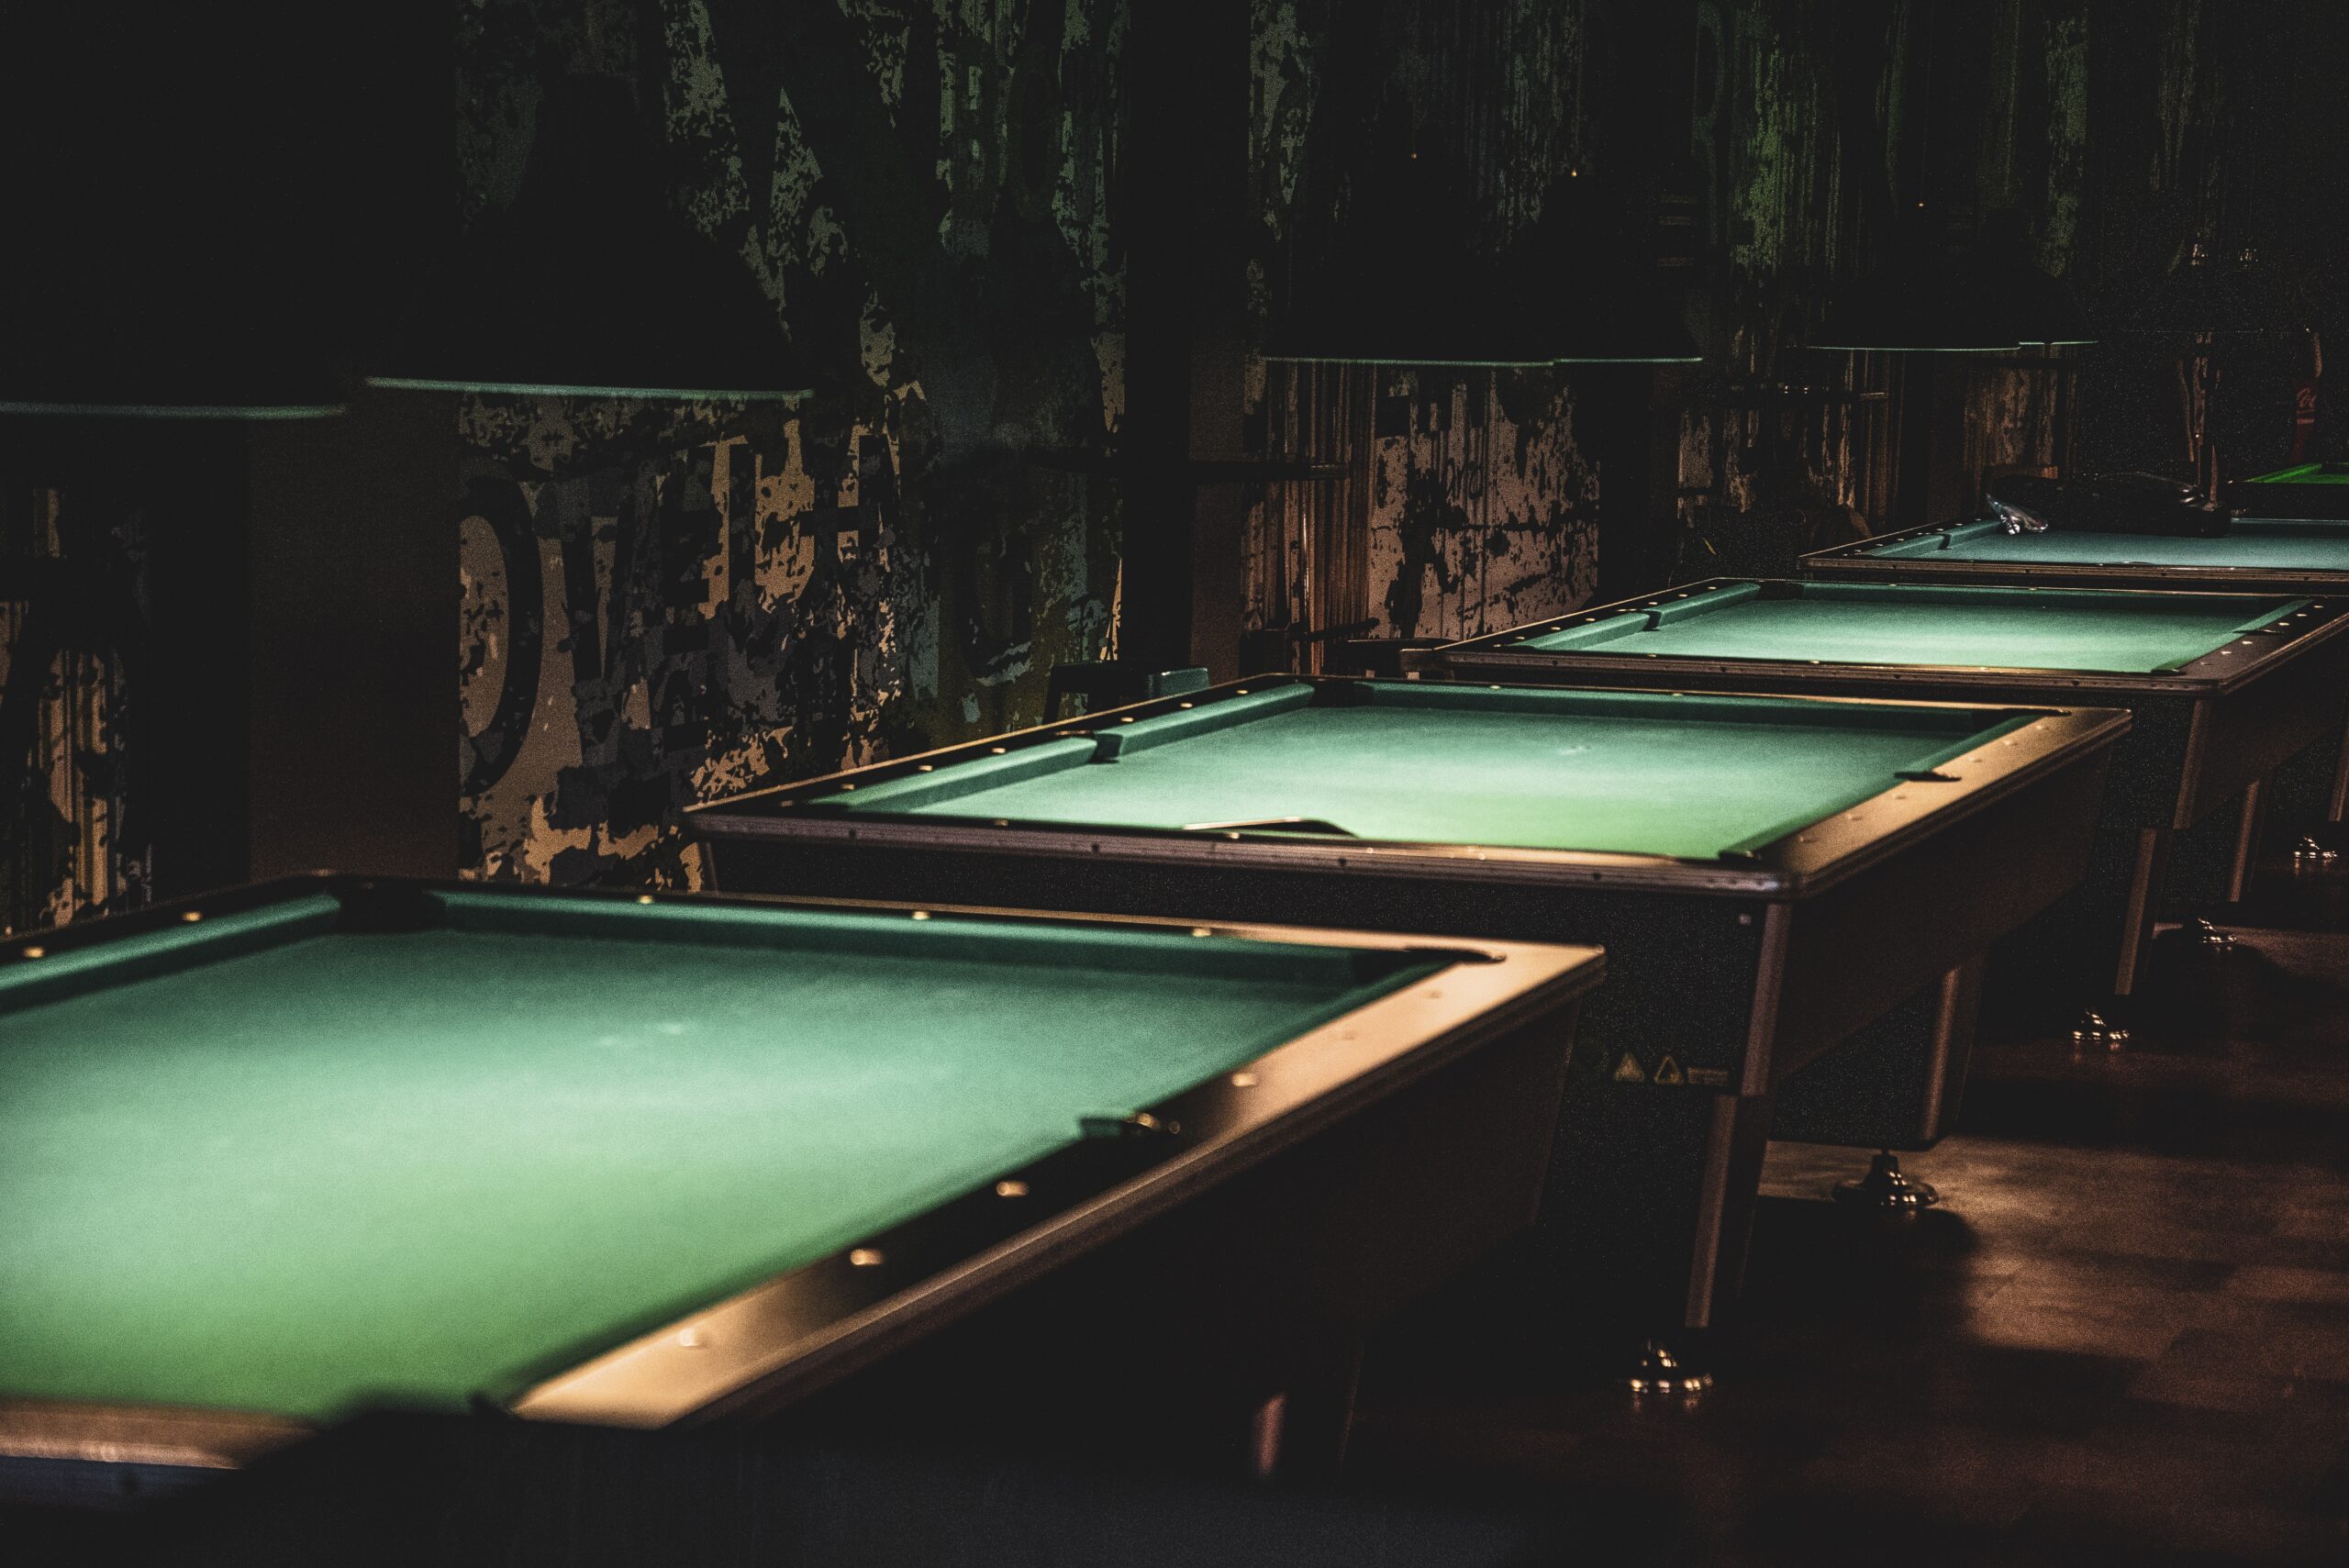 Get Your Pool Table to Its Destination with Ease